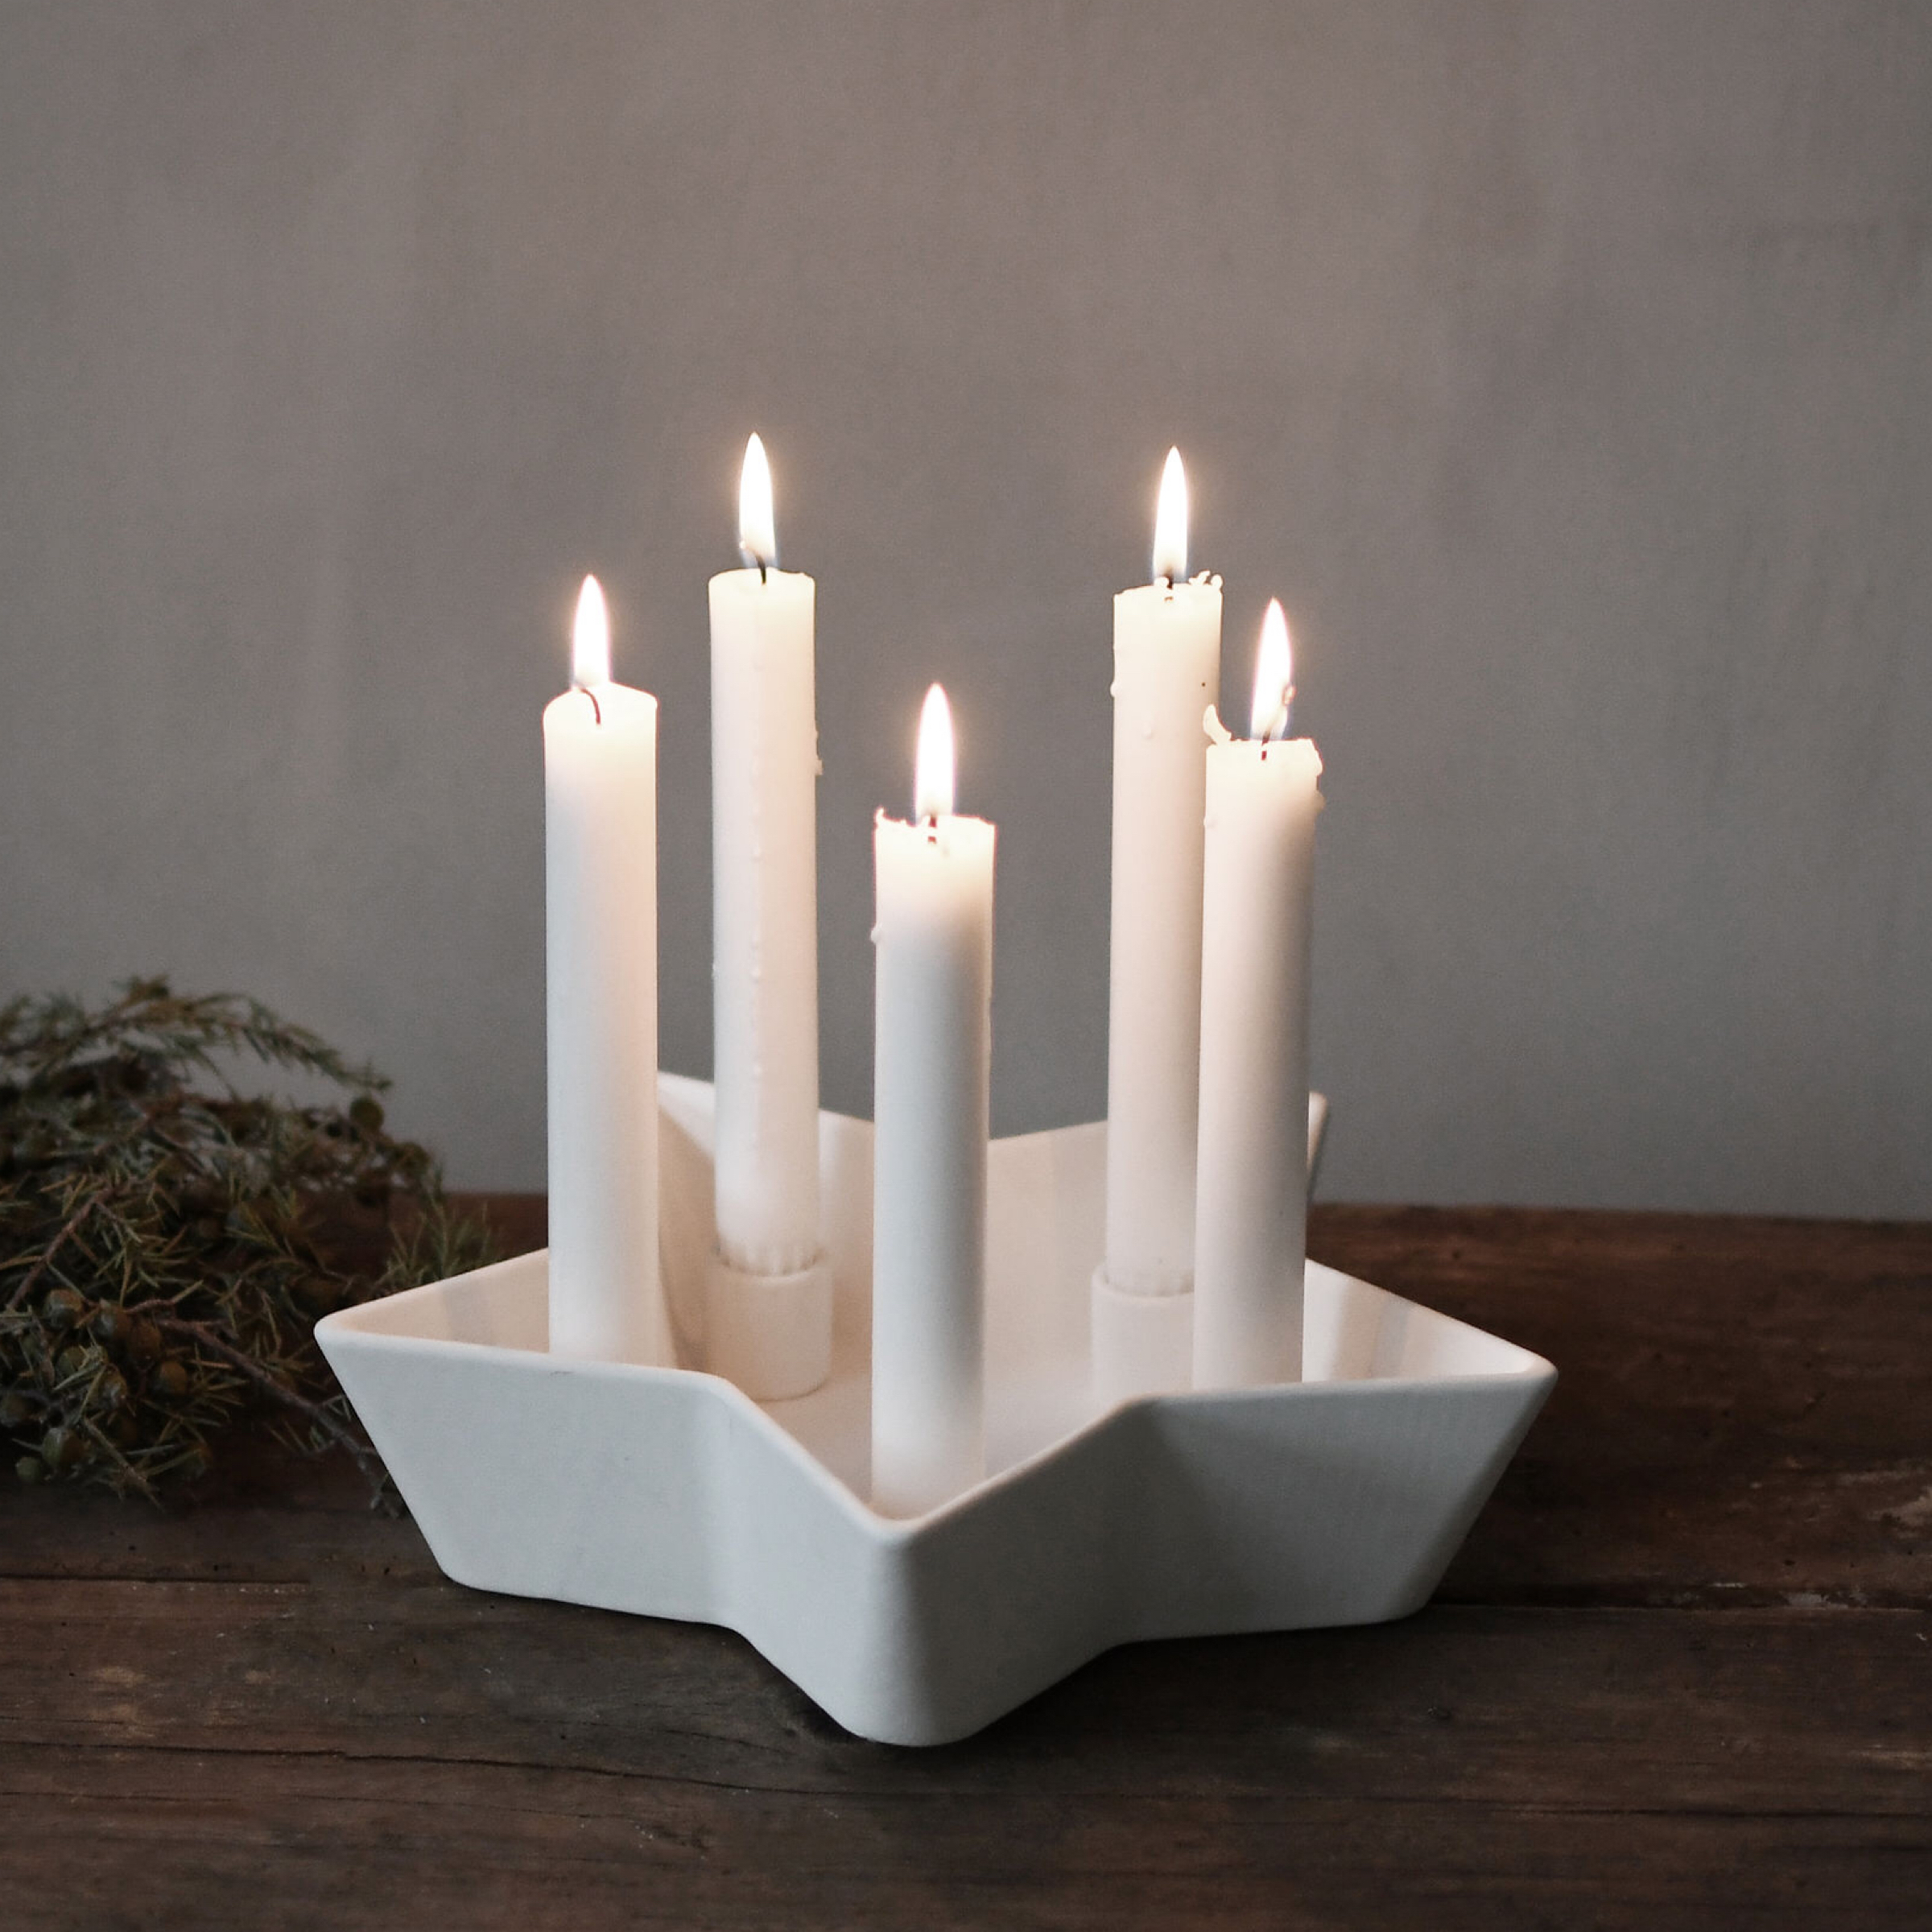 Storefactory Byle White Star Candlestick Dish 